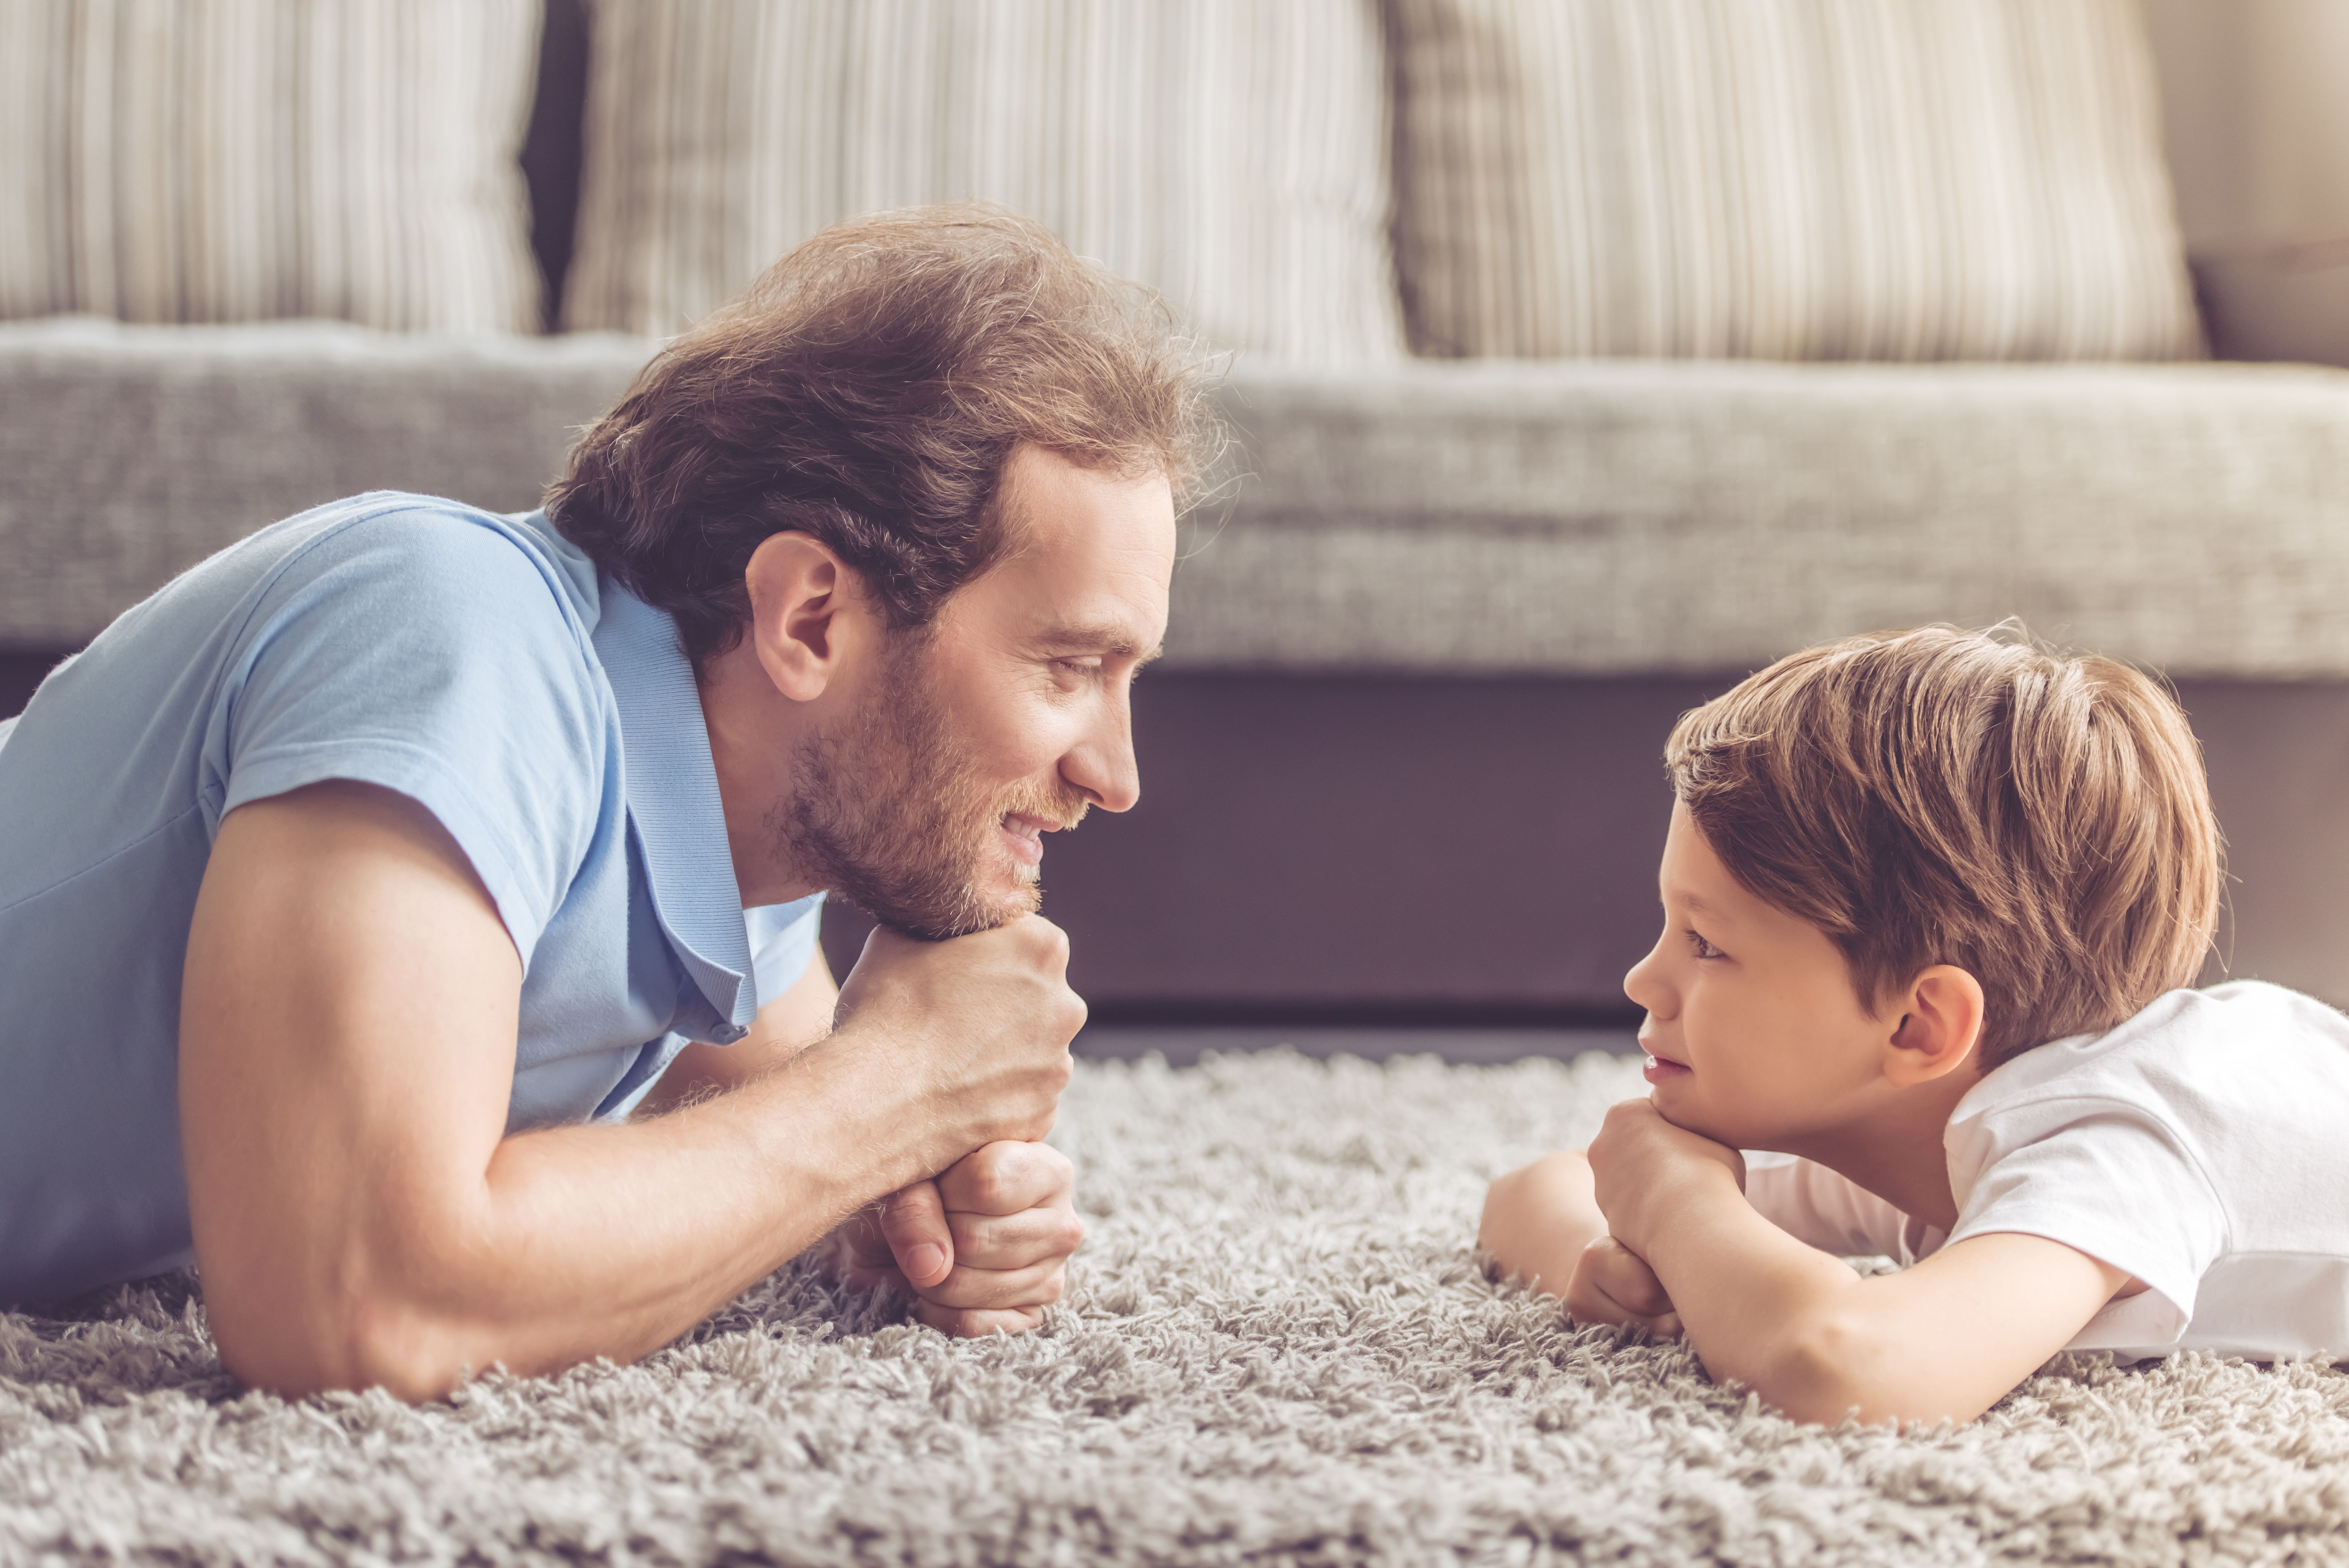 A father and son bonding. | Source: Shutterstock